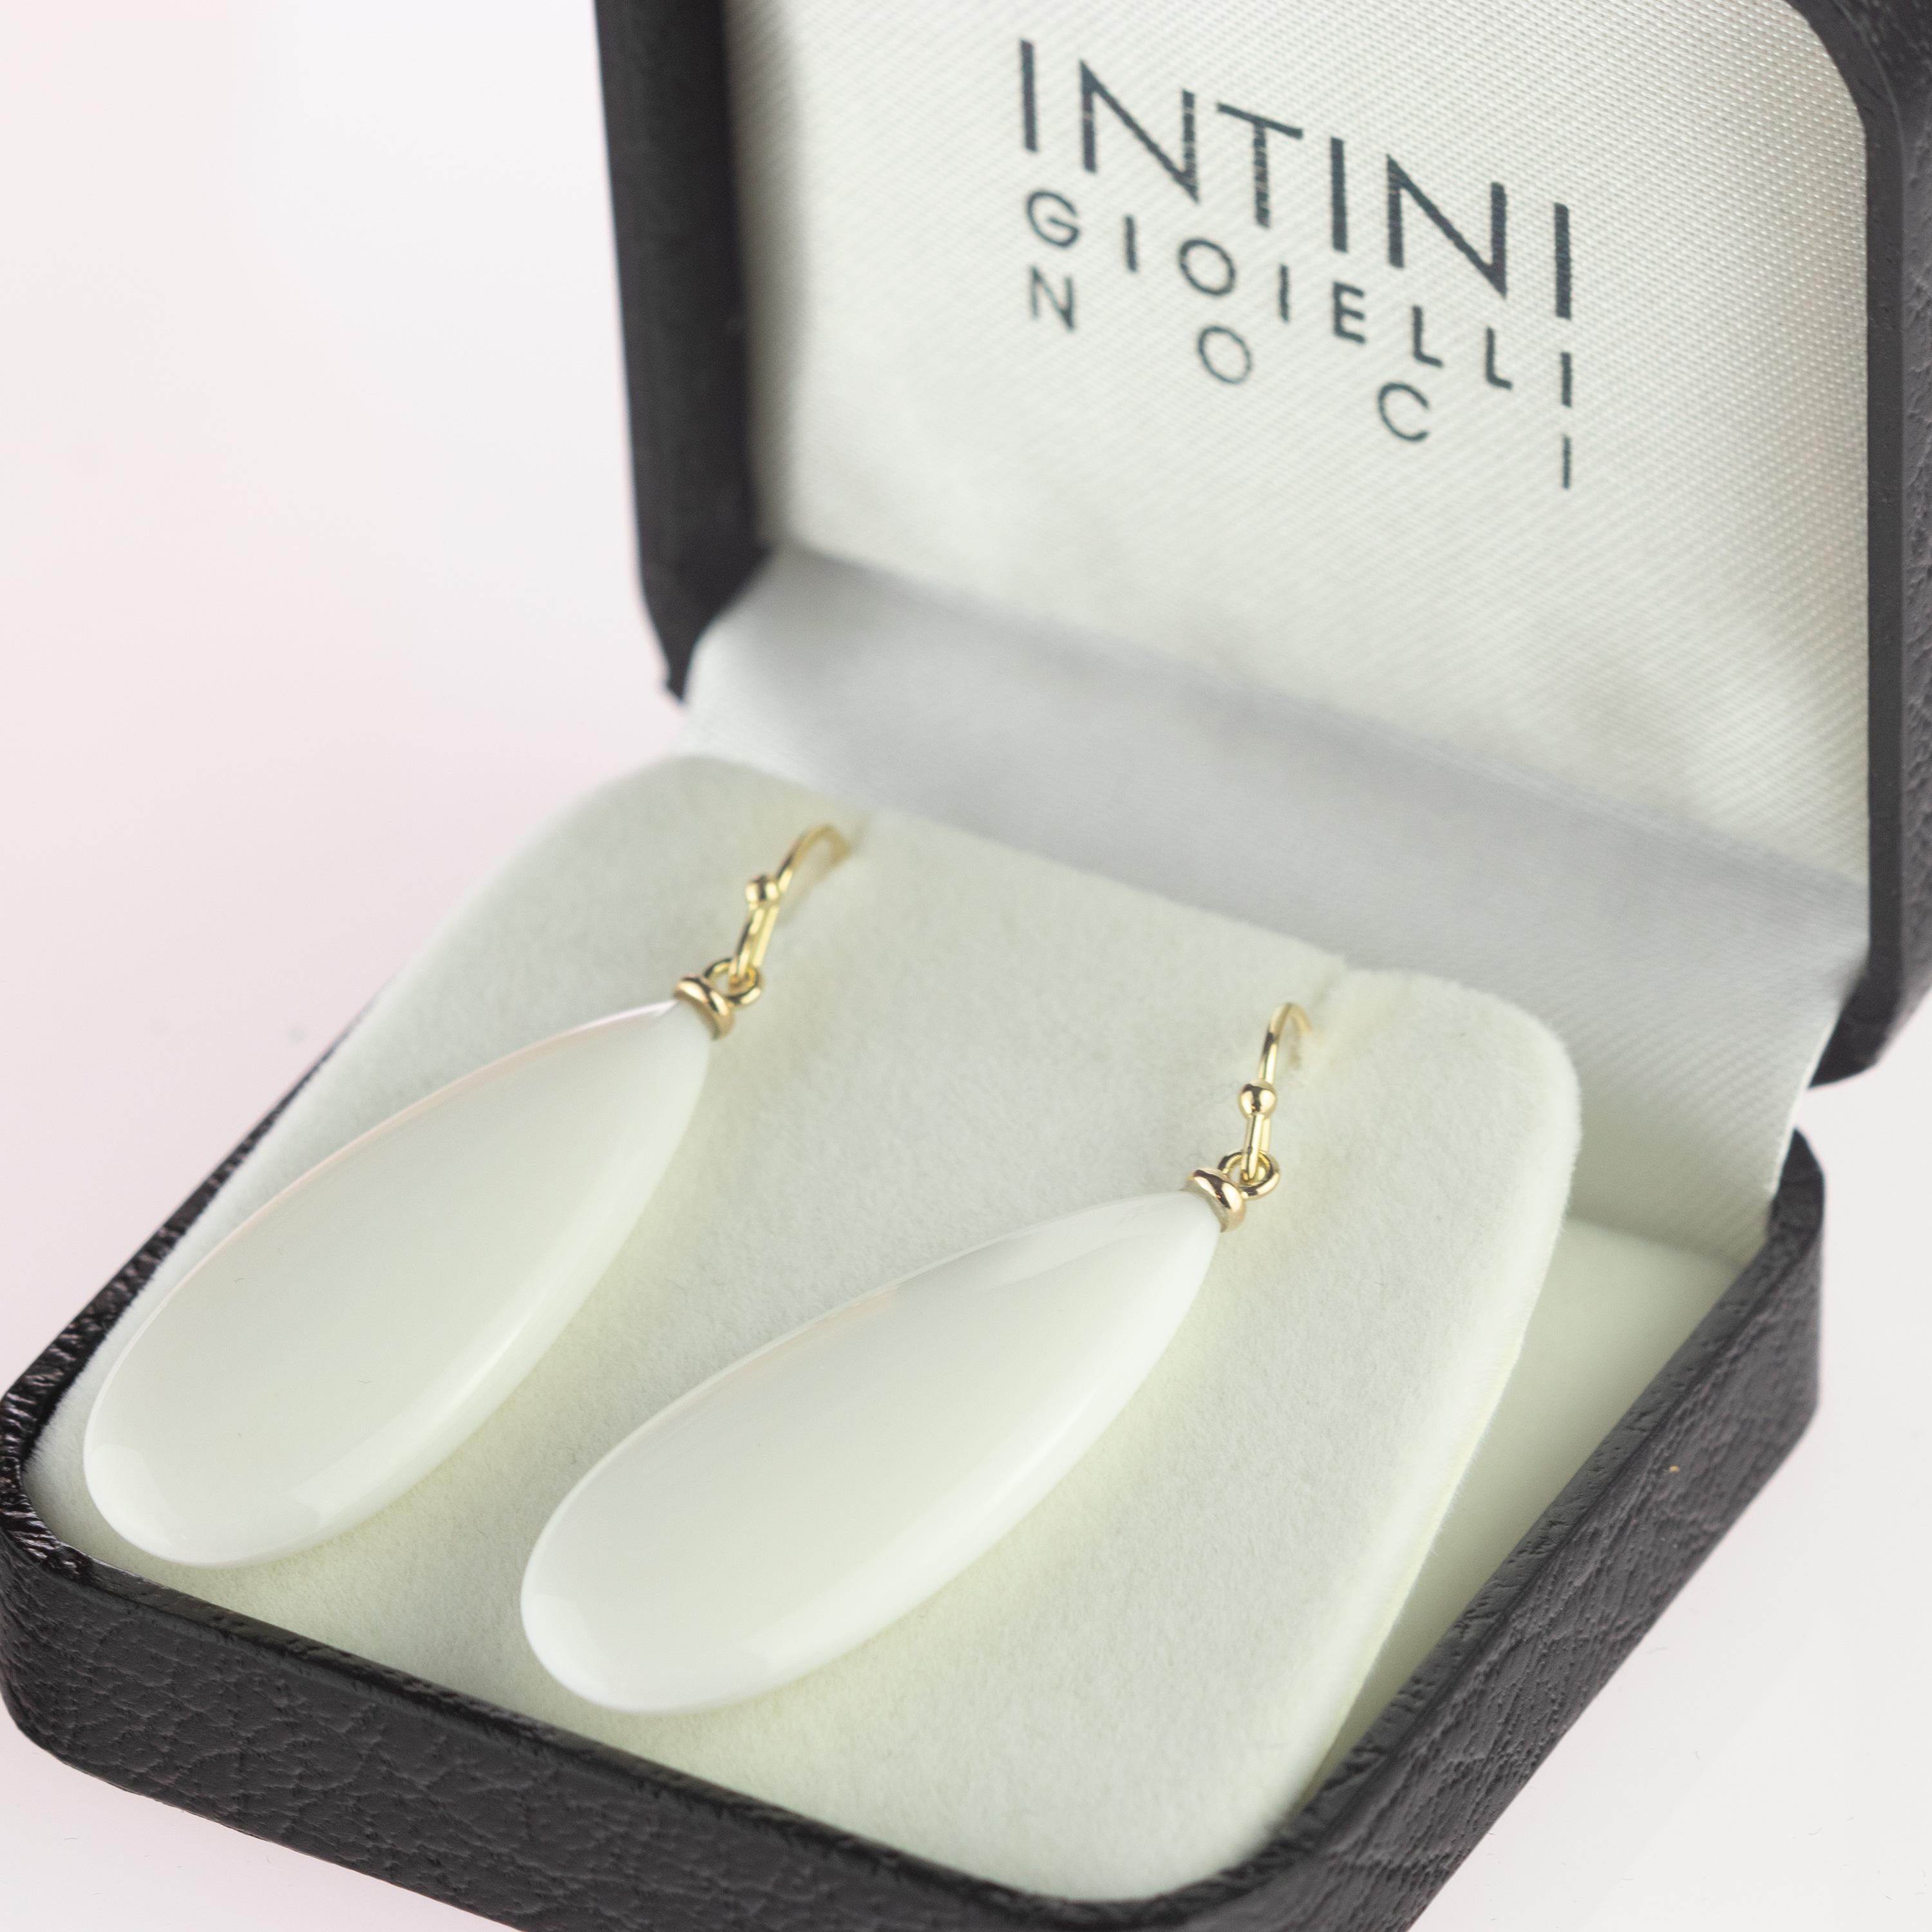 This stunning masterpiece with high quality craftsmanship was born in the Intini Jewels workshop. Our designers add all the italian modern style and glamour in one exquisite piece. Stunning 41.5 white Agate flat teardrop, hanging from 18 karat